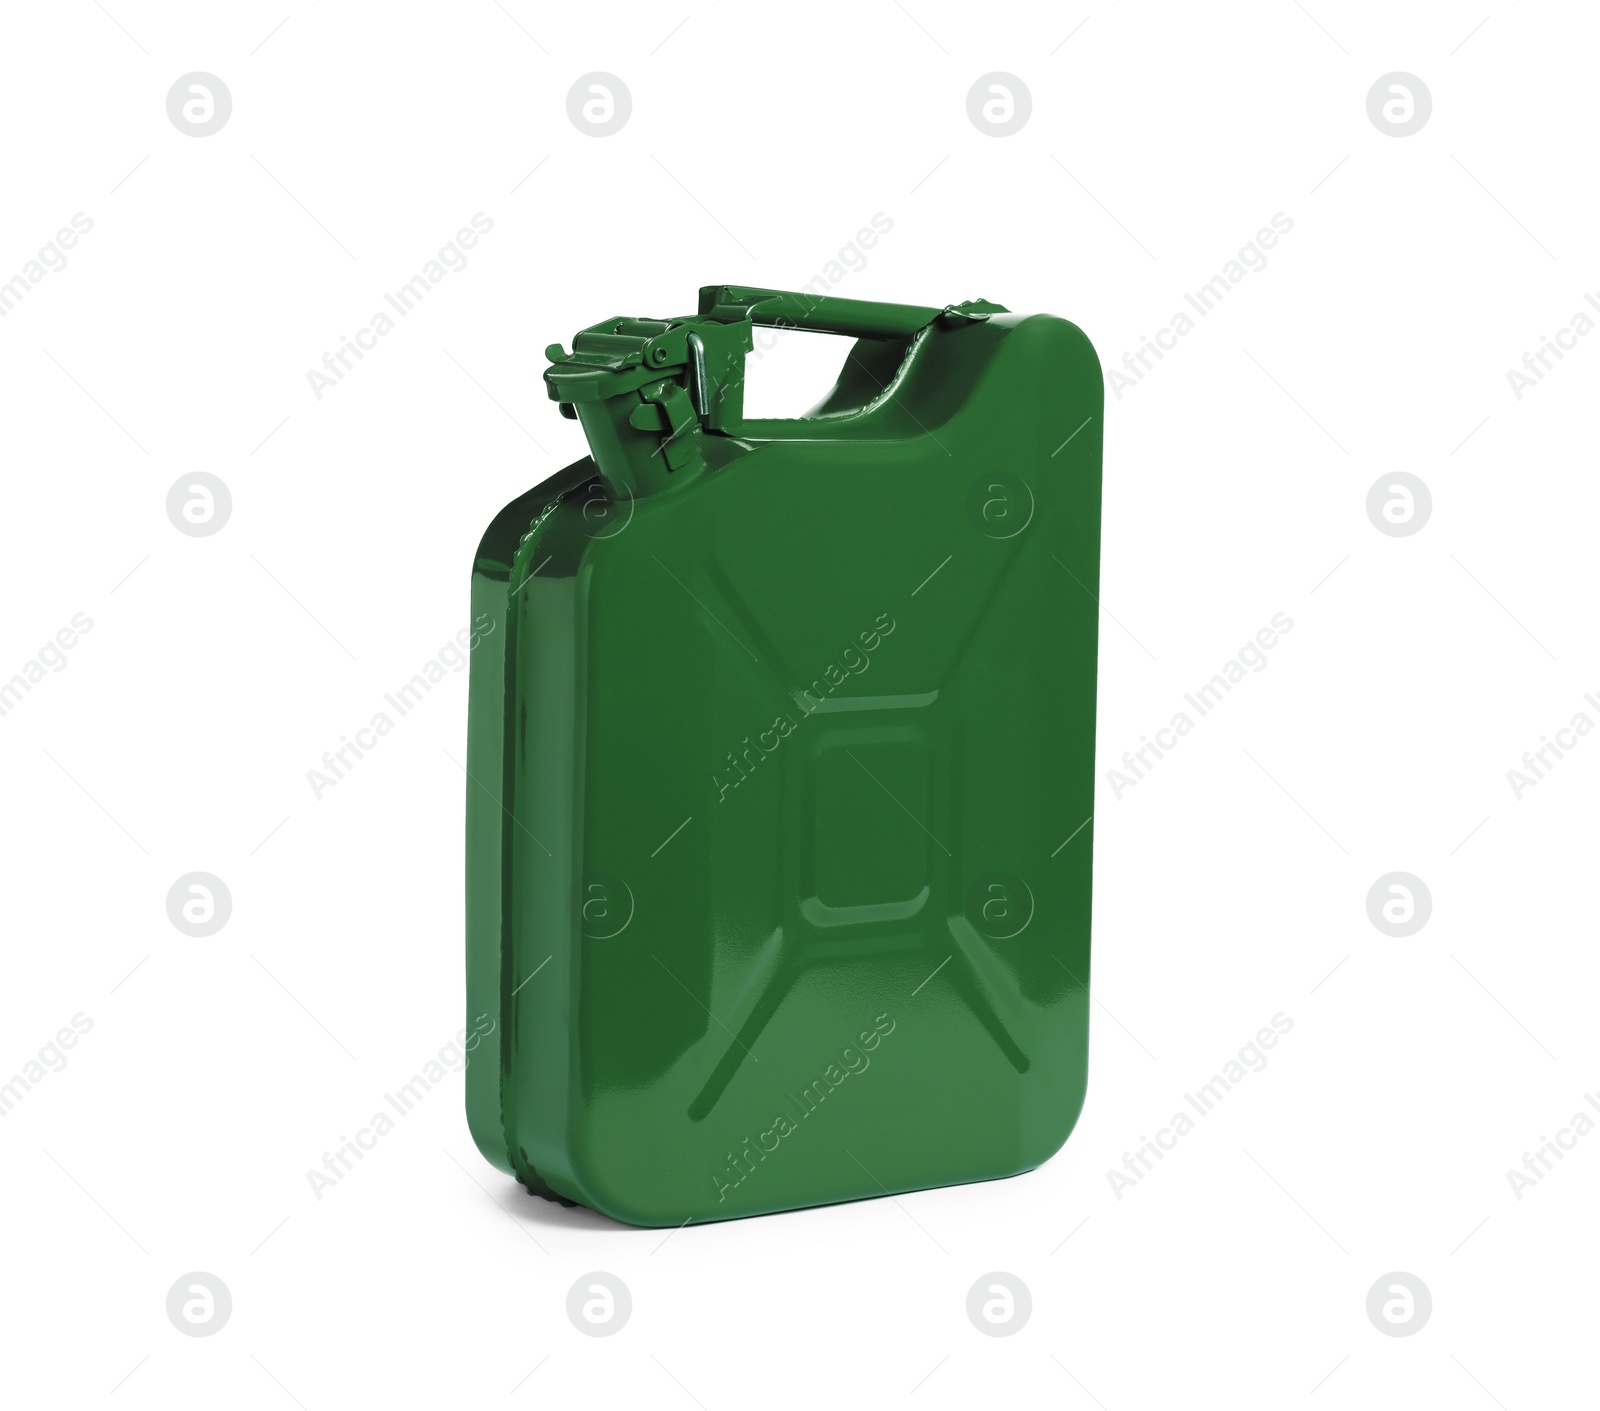 Photo of New khaki metal canister isolated on white